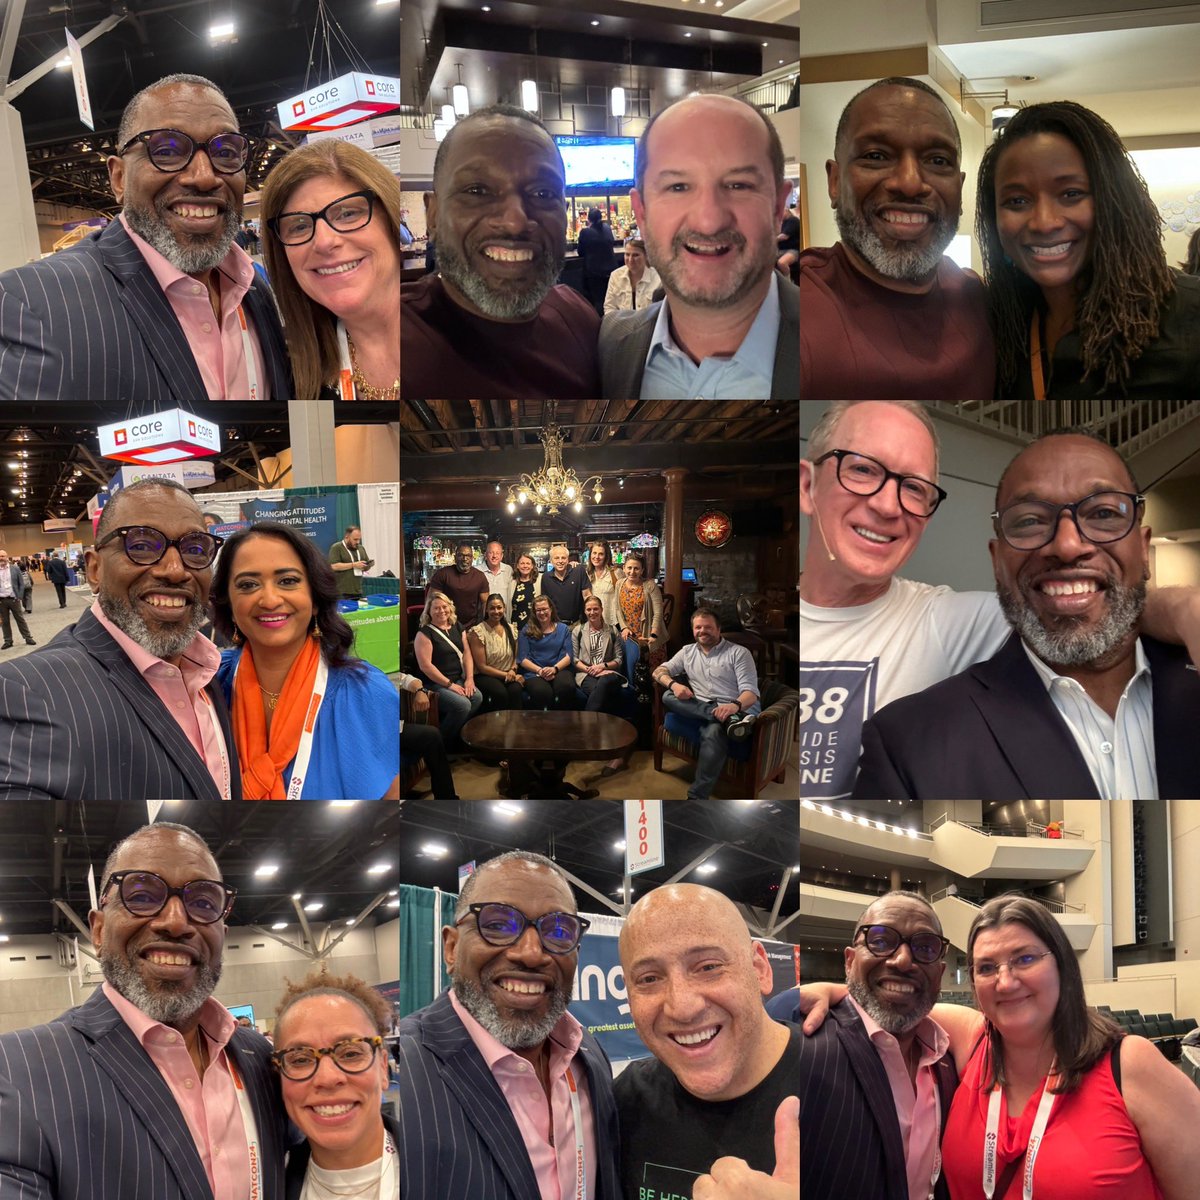 Having an awesome time at #NatCon2024 Great learning opportunity, great networking opportunity, and great catching up with friends! @afspnational @Action_Alliance @Zer0Suicide @SPRCtweets @EDCtweets @NationalCouncil @KevinHinesStory @riinternatl @samhsagov